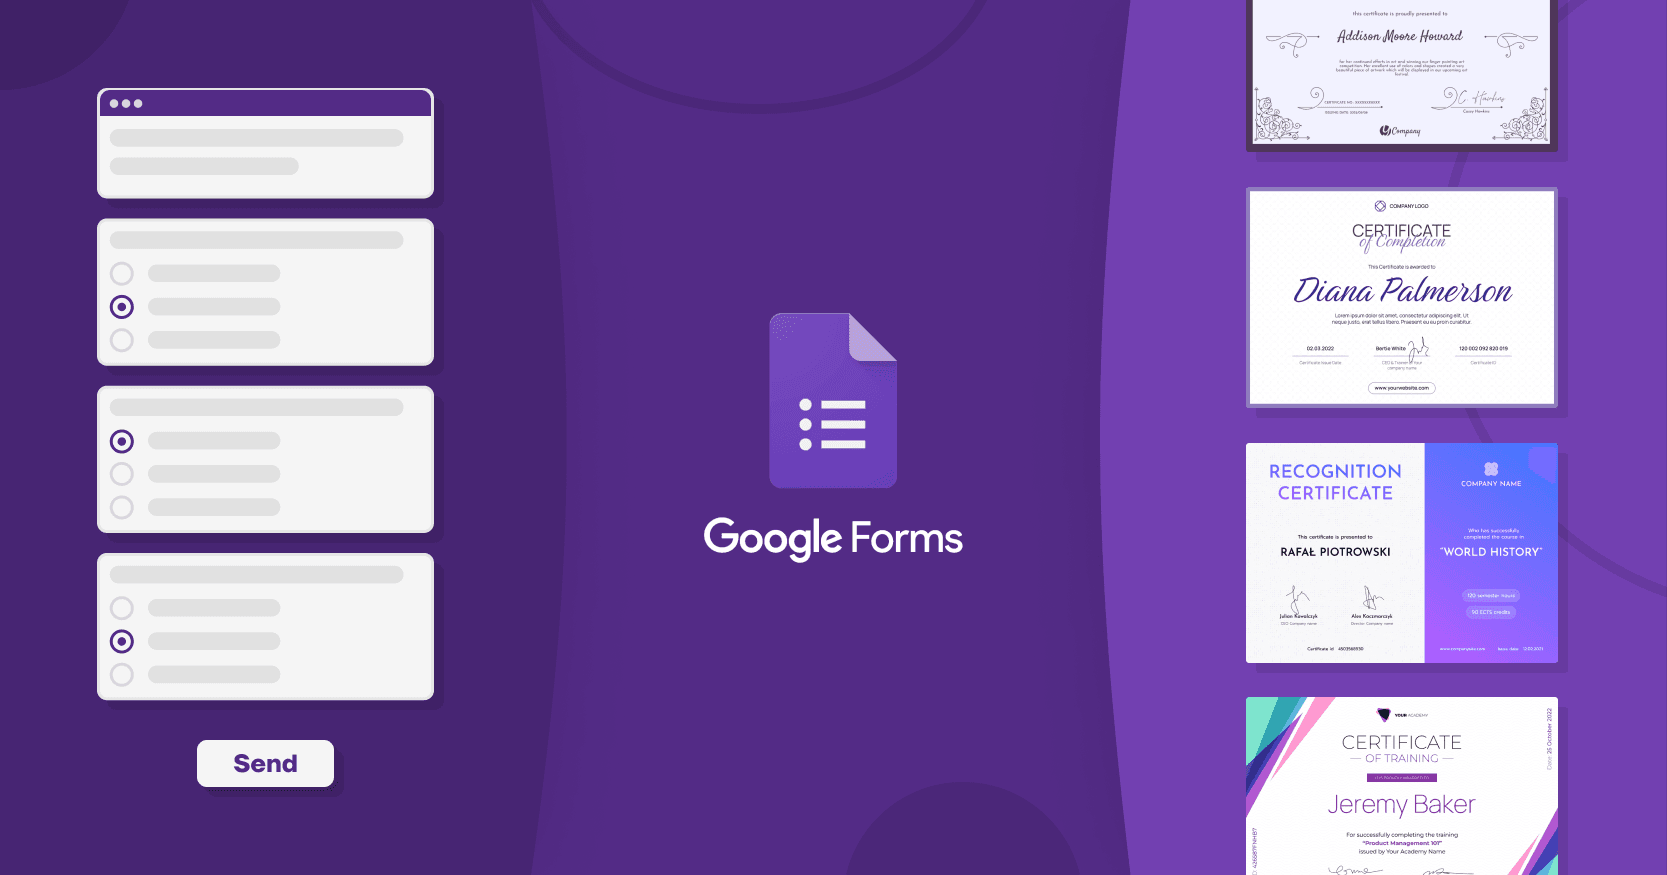 How to Generate Certificates with Google Forms? cover image